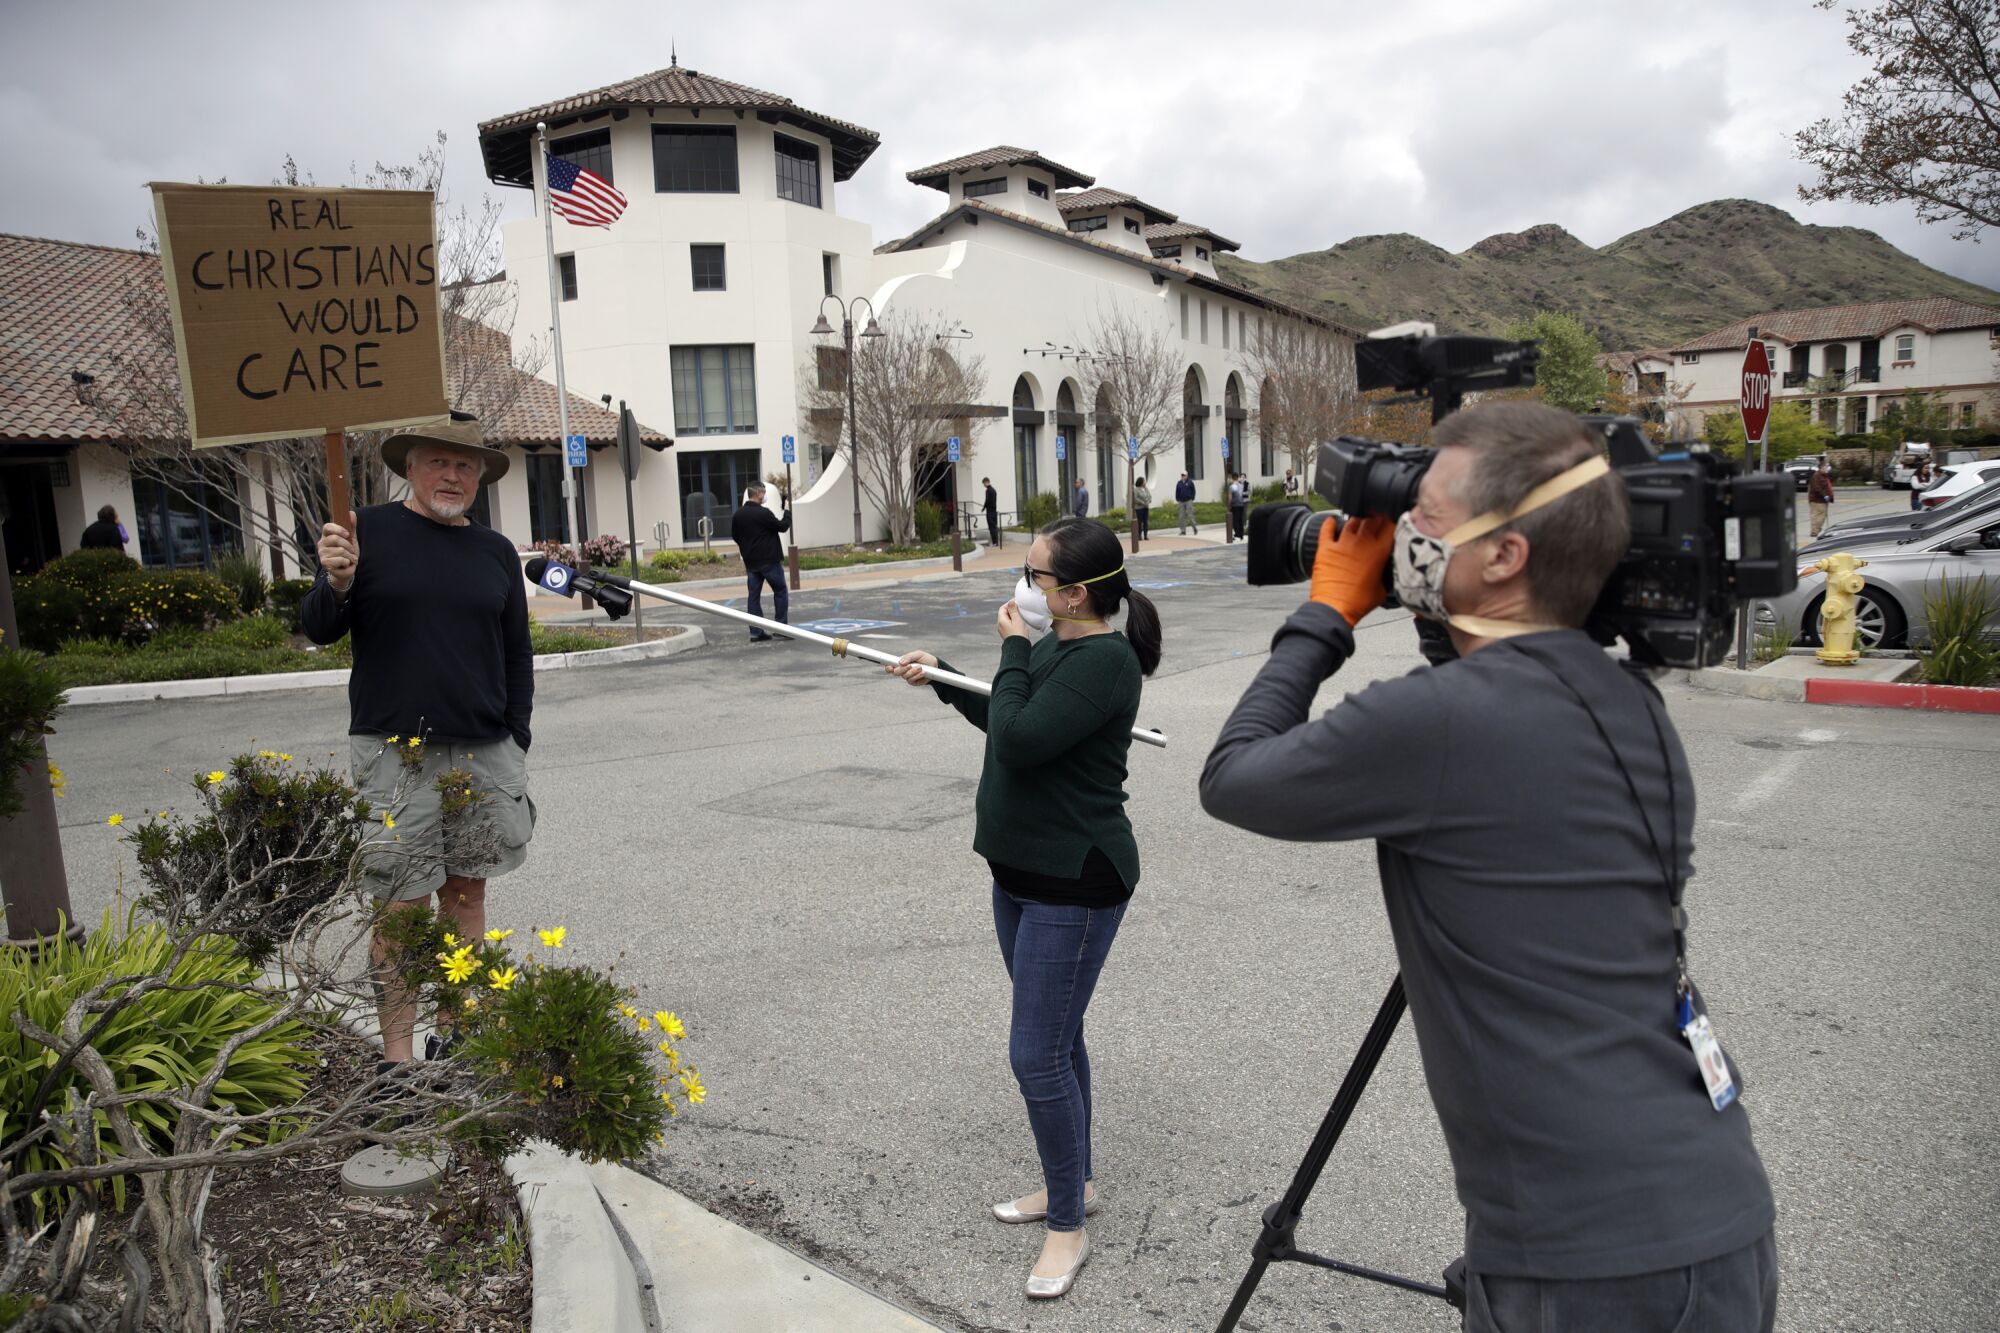 CALIFORNIA: Reporters practice social distancing as they interview Andrew Goetze, left, who protested a service at Godspeak Calvary Chapel on Sunday in Newbury Park, Calif.